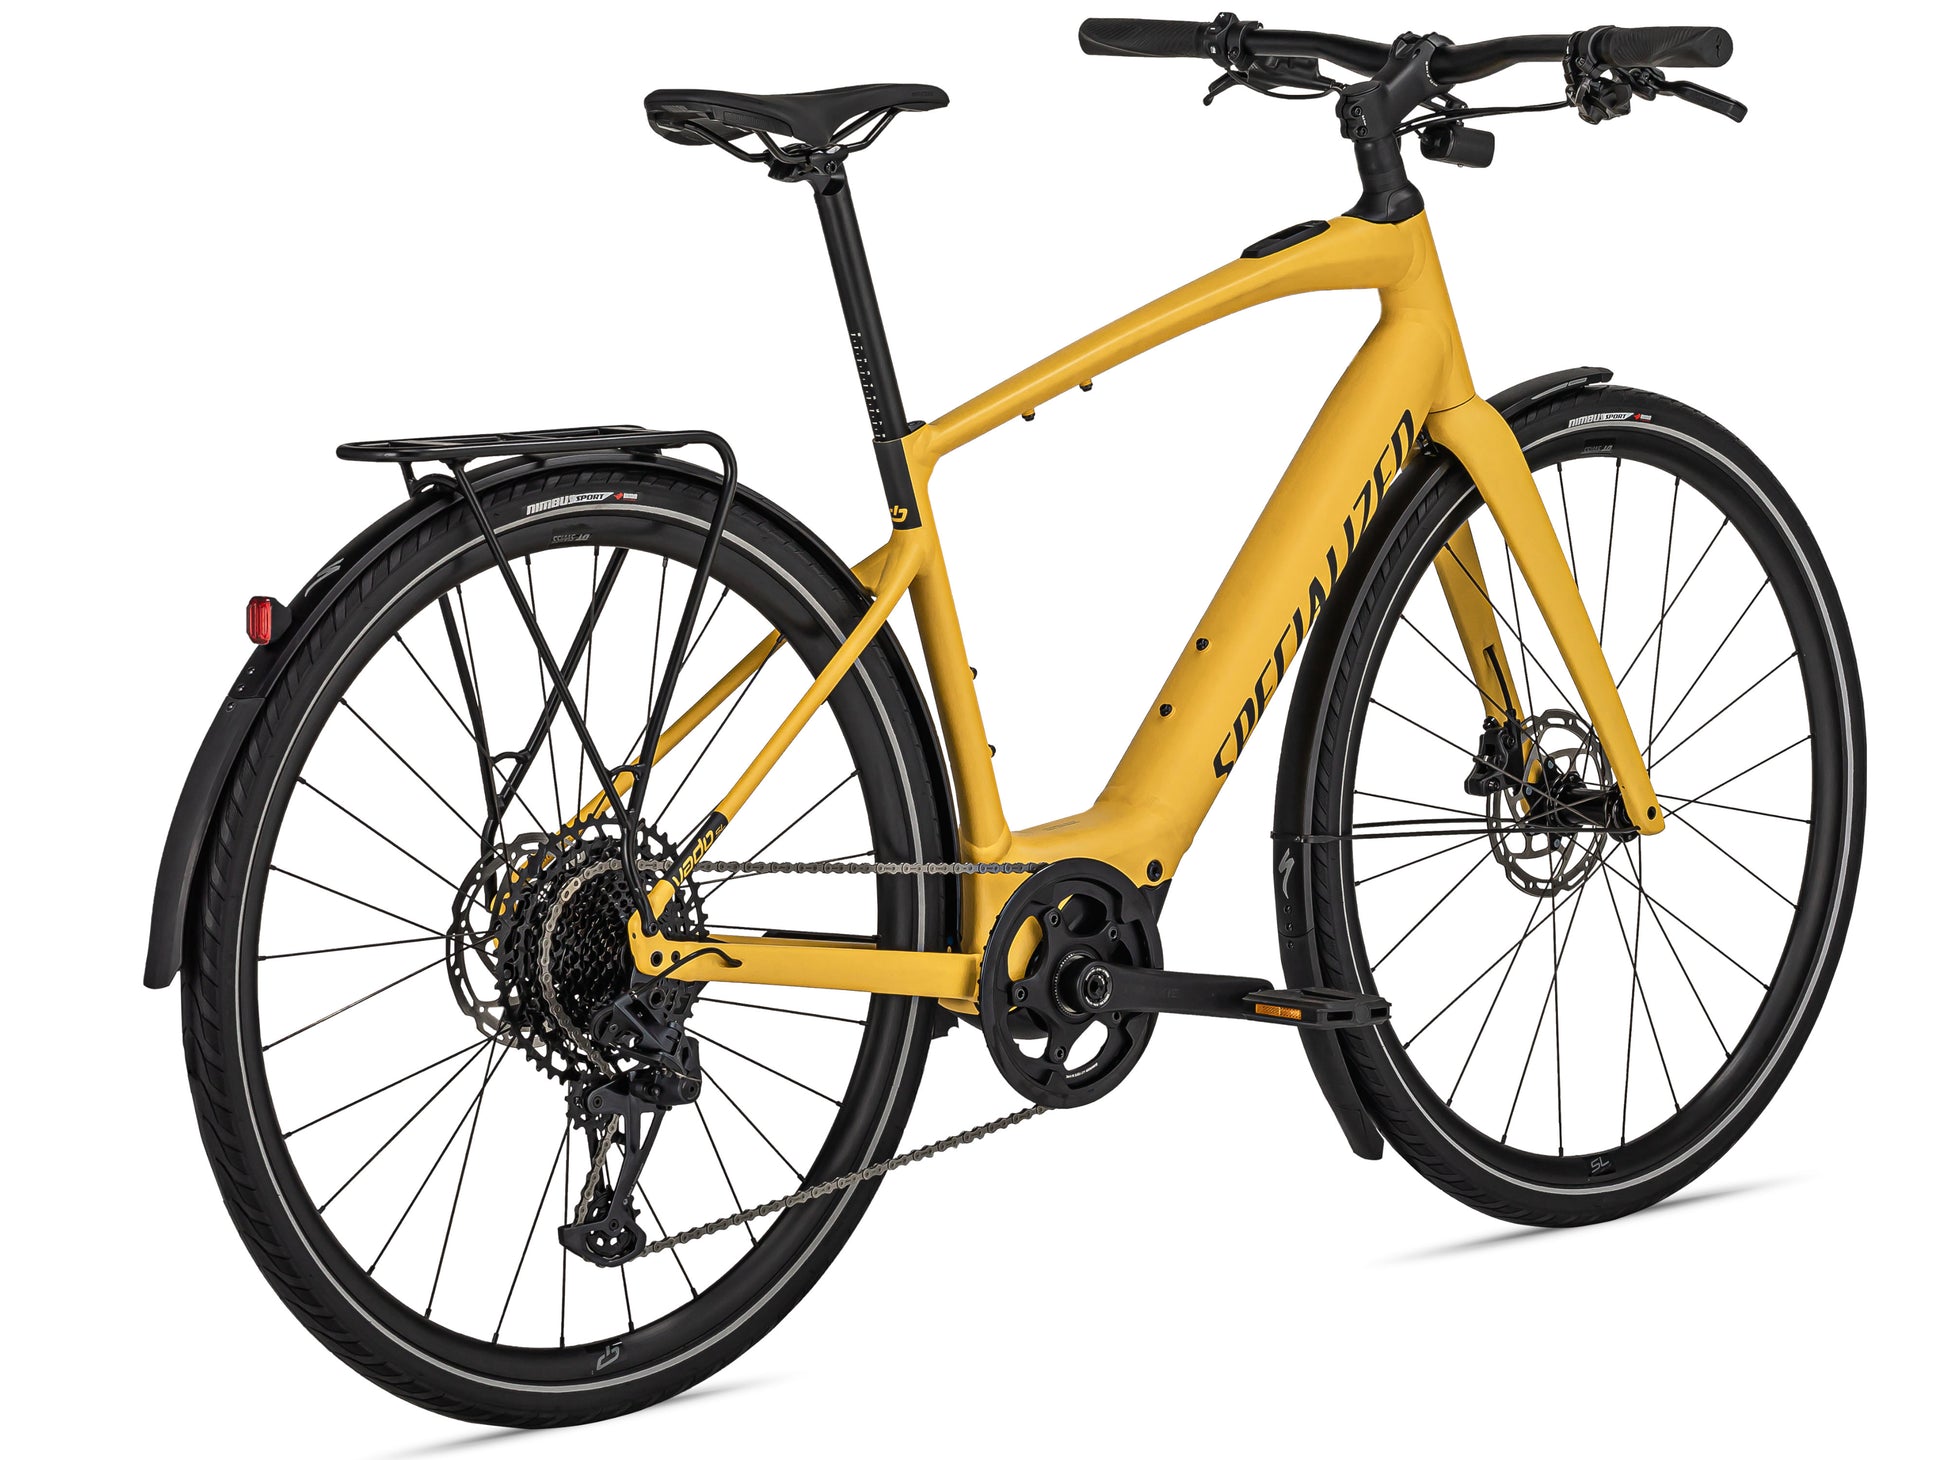 Specialized Turbo Vado SL 5.0 EQ eMTB Brassy Yellow Black Reflective back right side profile on Fly Rides